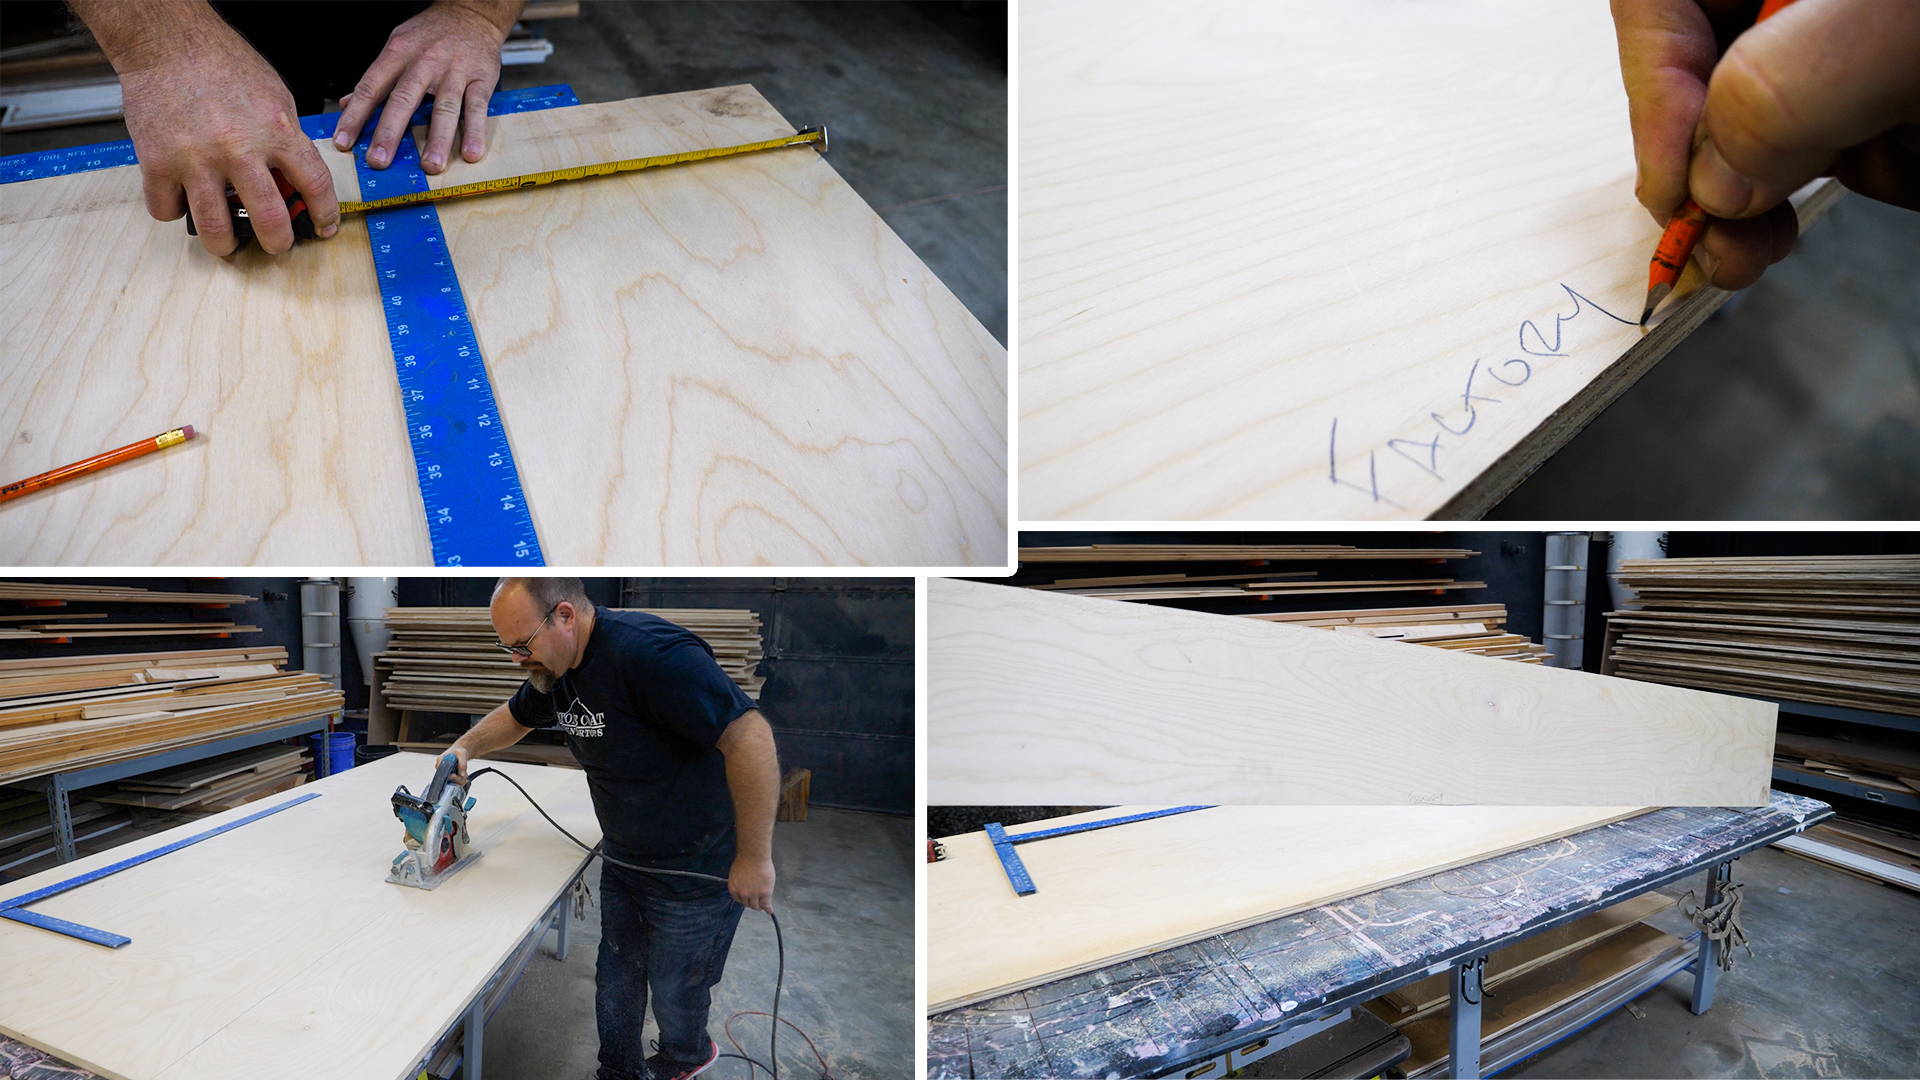 Step #1: Create your base. Rip a sheet of plywood to 9”, measuring from the factory edge.